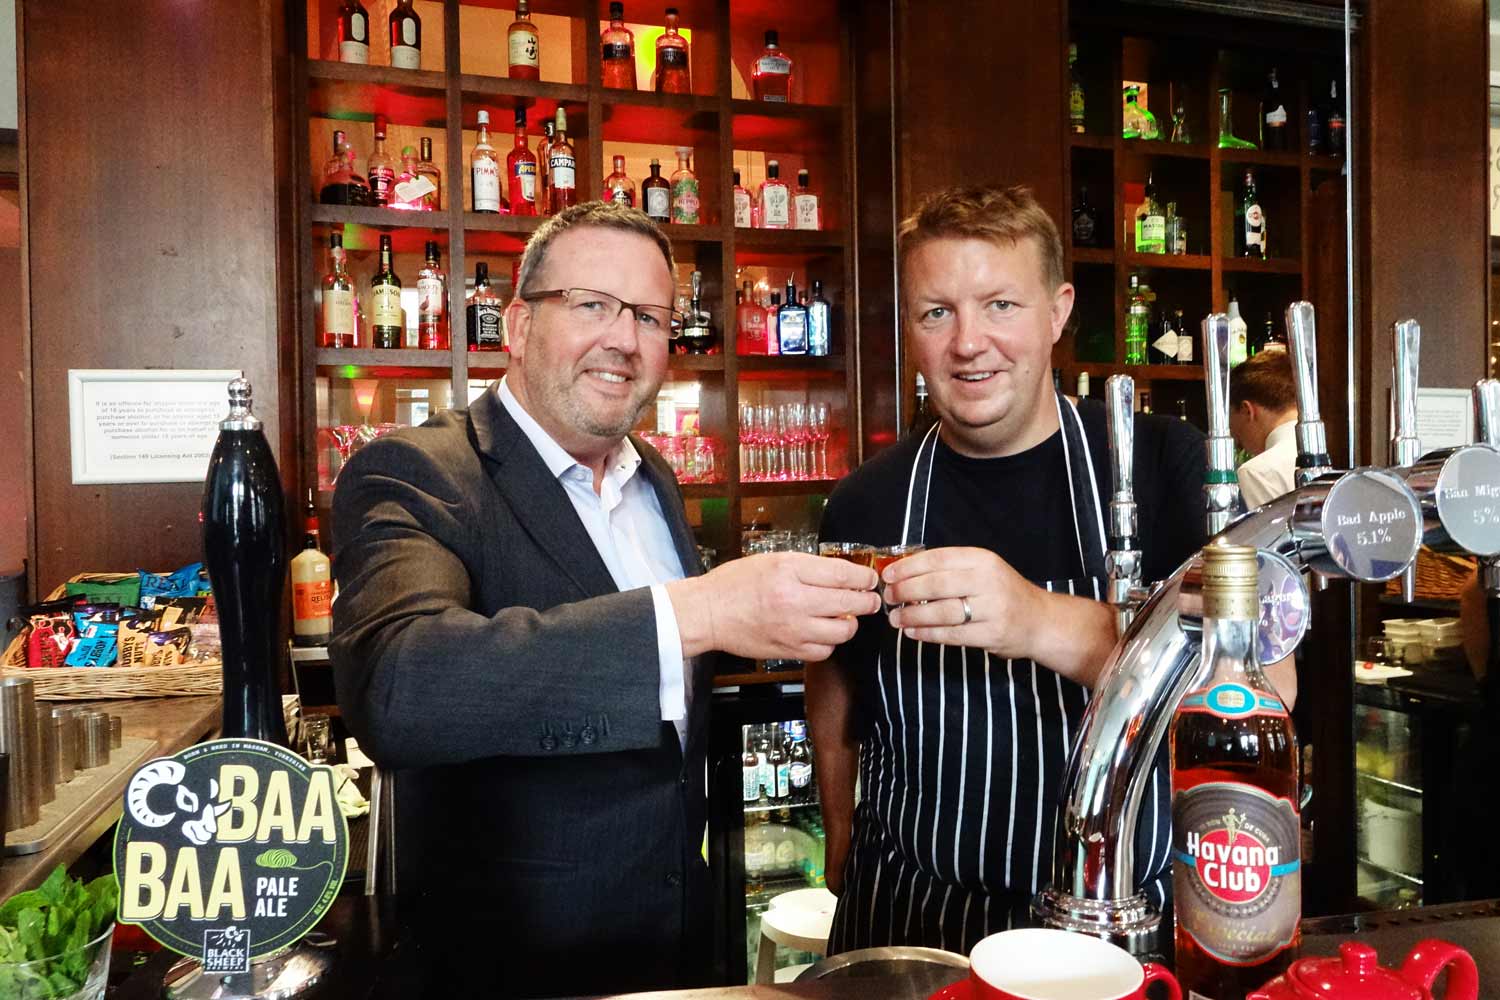 Simon Cotton, Group Managing Director for HRH Group and Dean Sowden, Executive Chef at Scran